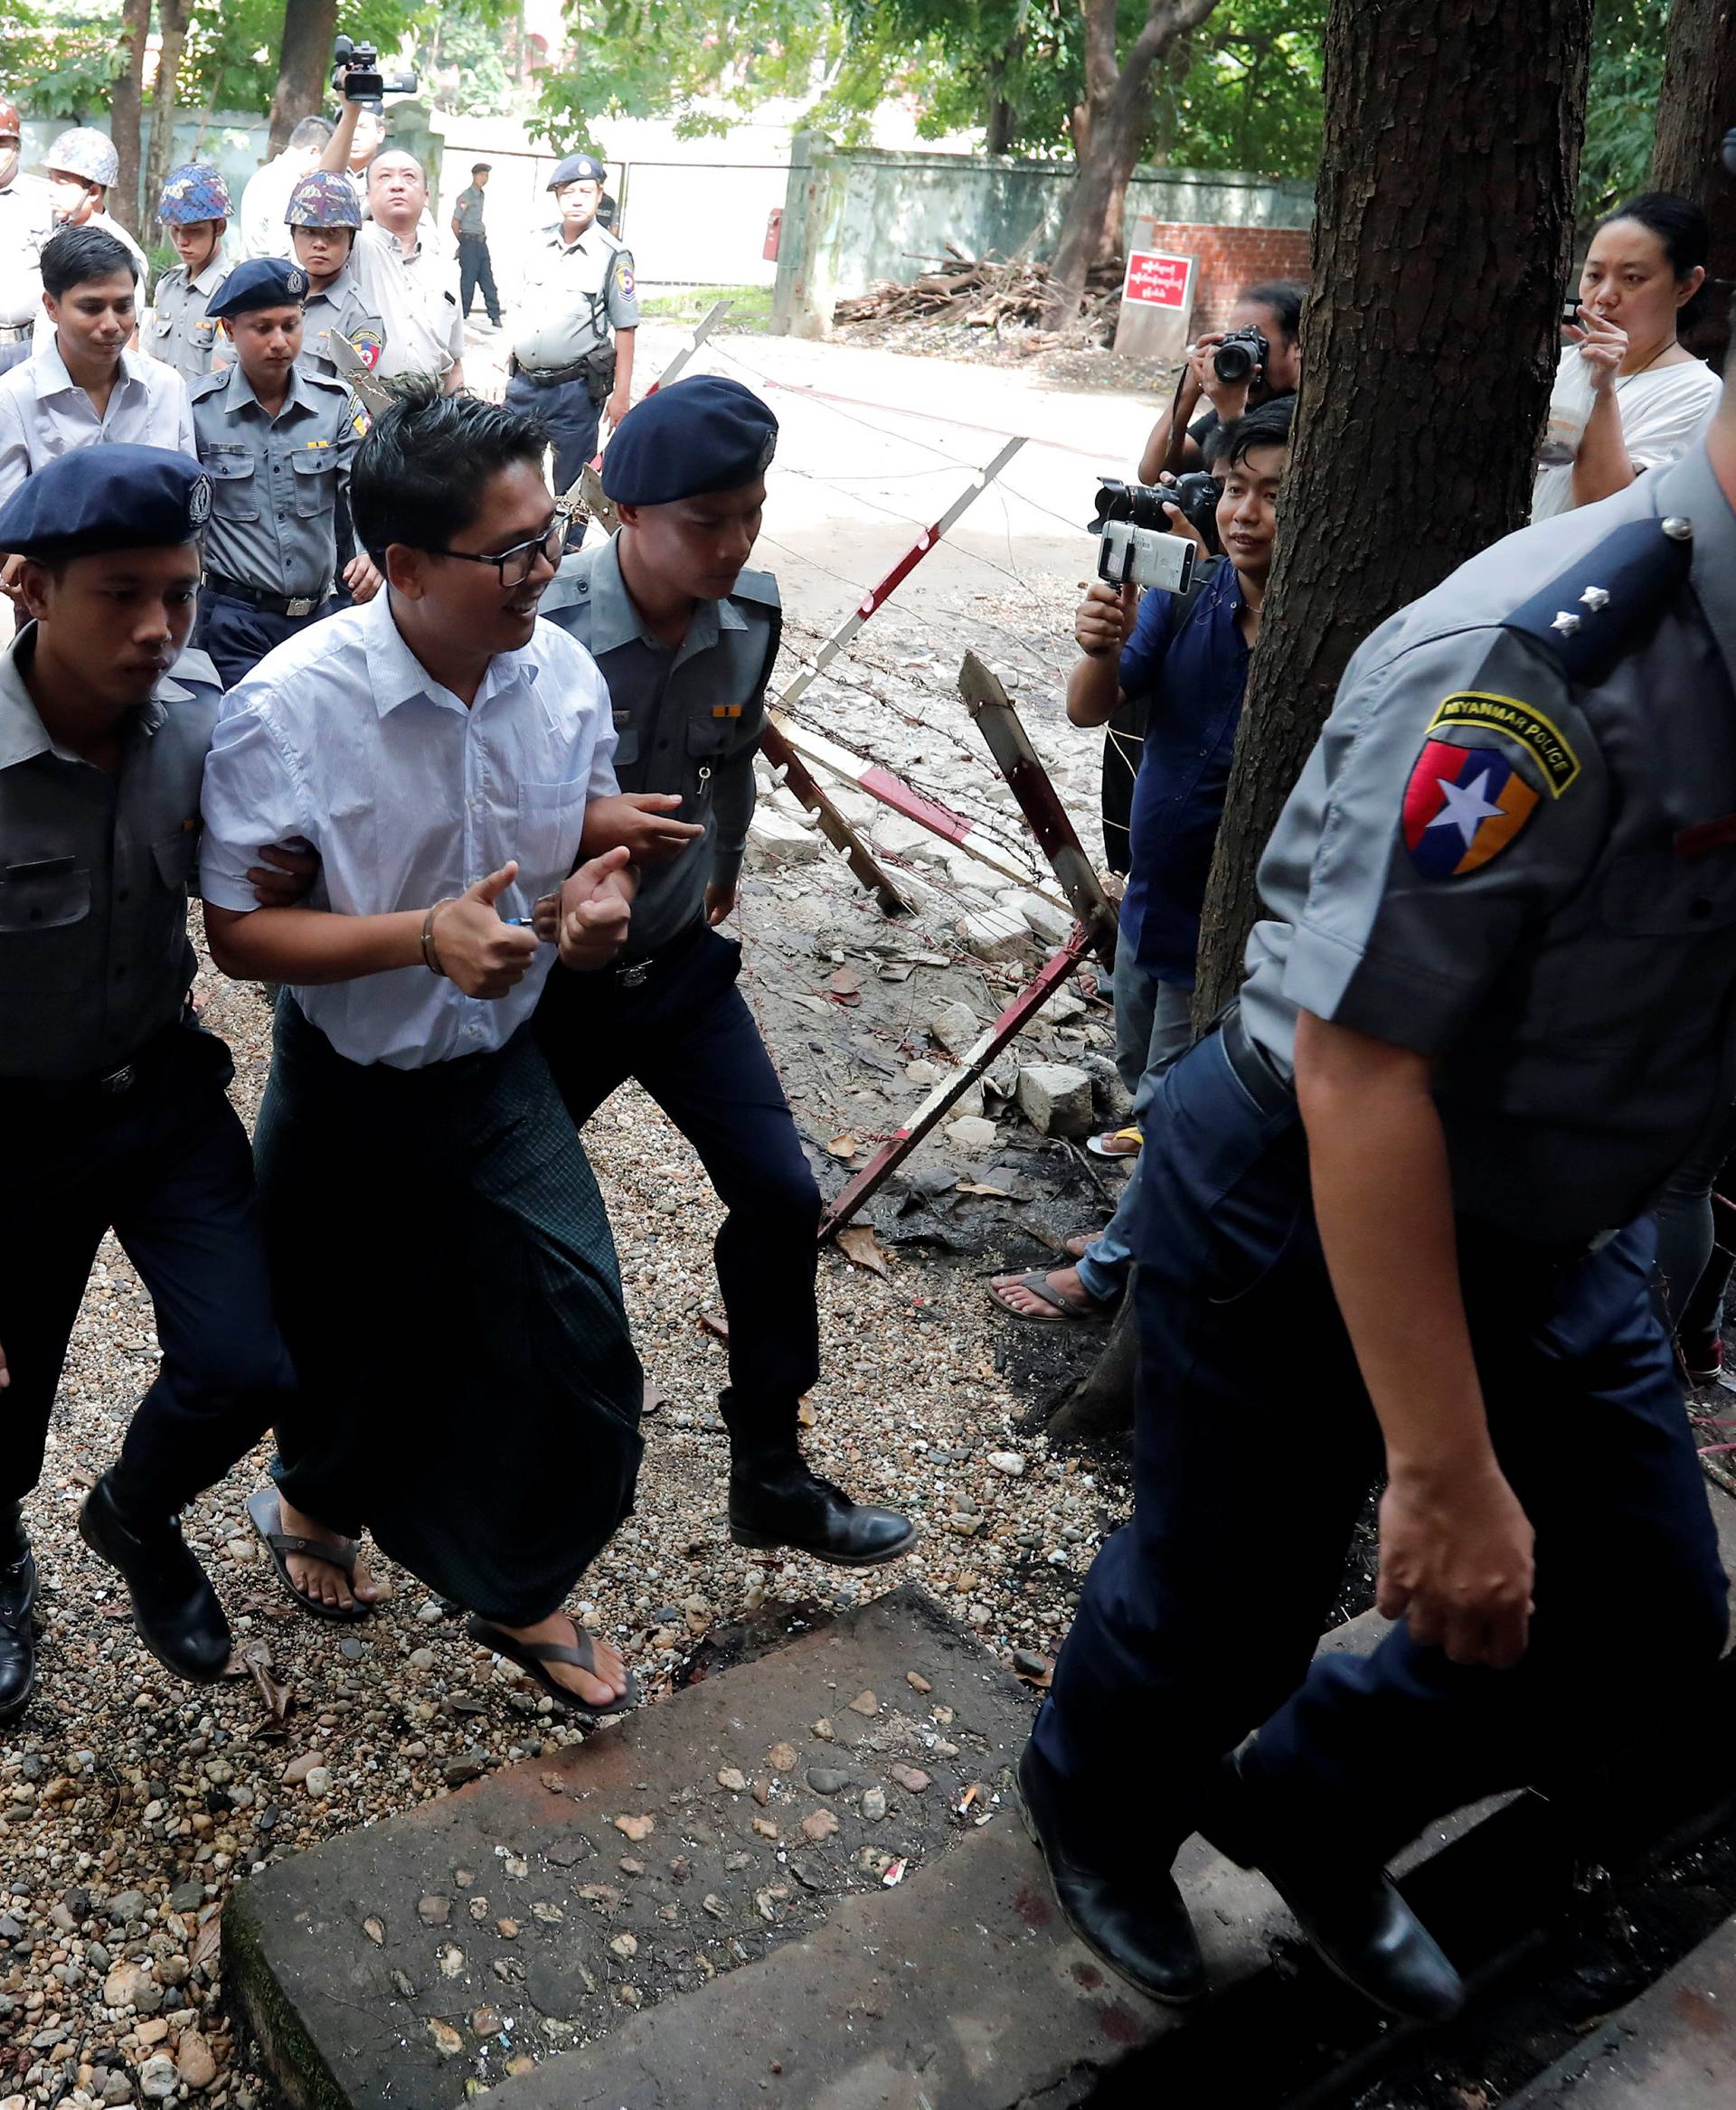 Detained Reuters journalists Wa Lone and Kyaw Soe Oo arrive to listen to their verdict in Yangon